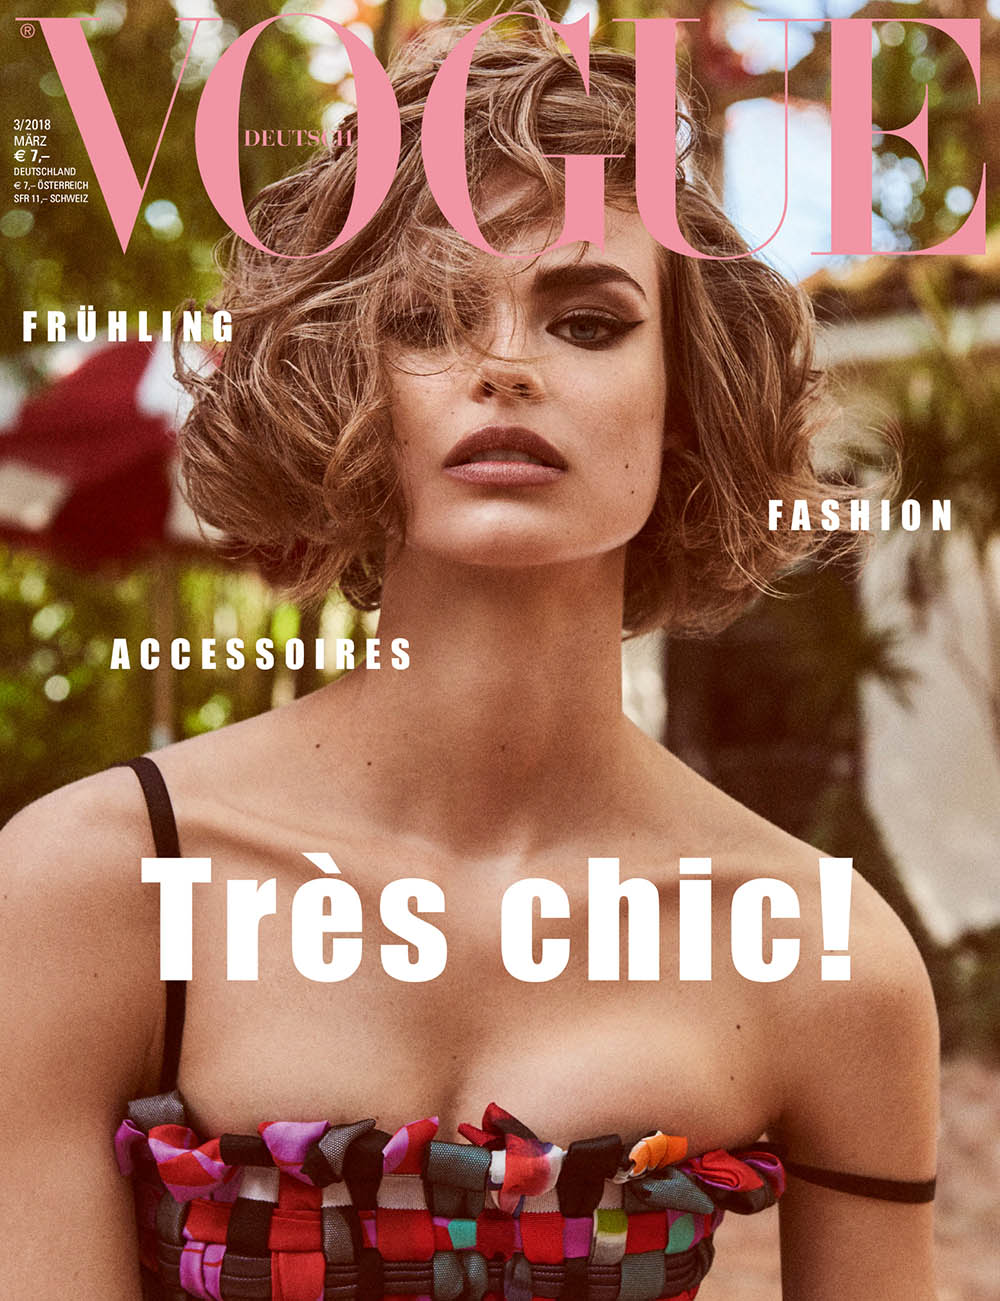 Birgit Kos covers Vogue Germany March 2018 by Giampaolo Sgura